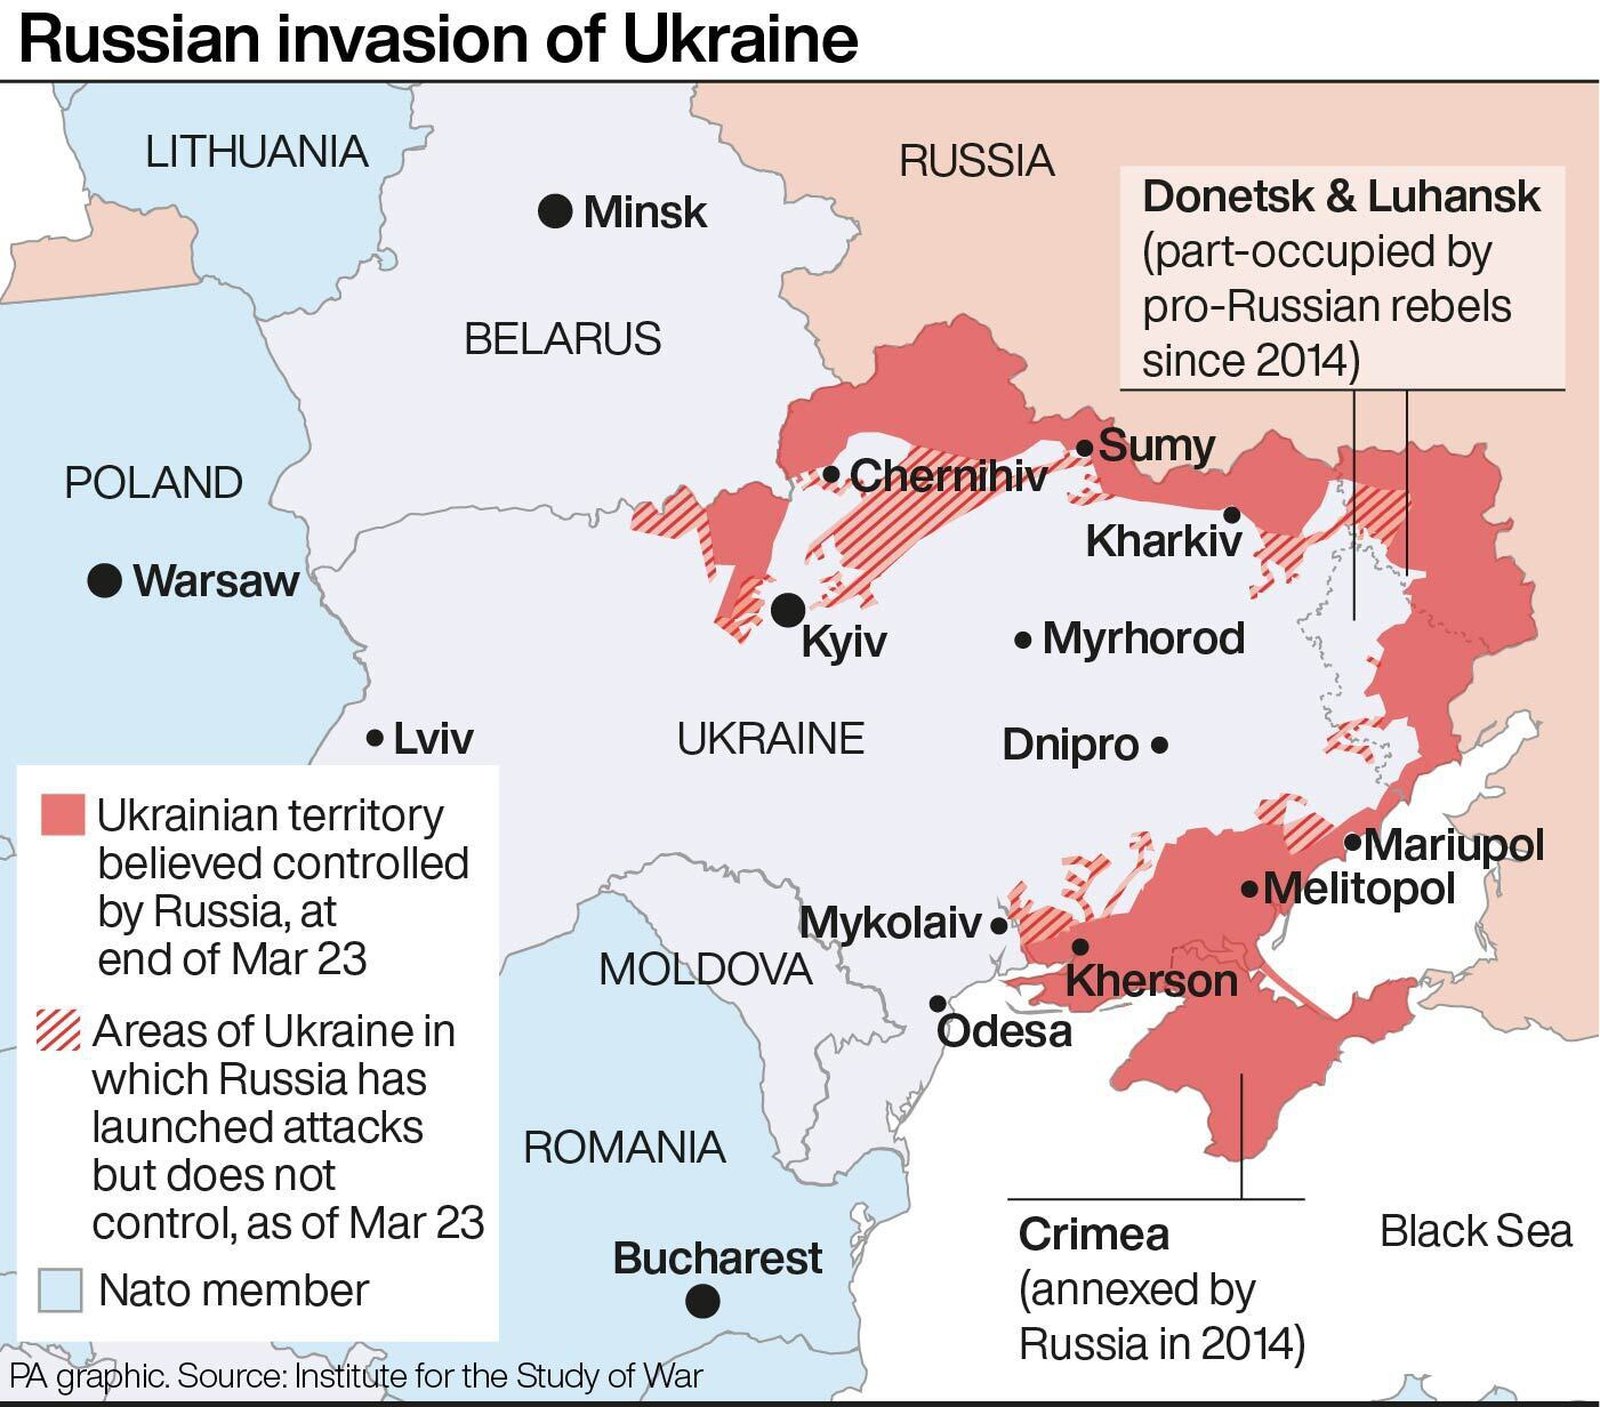 Image - The Russian invasion of Ukraine, as of 23 March